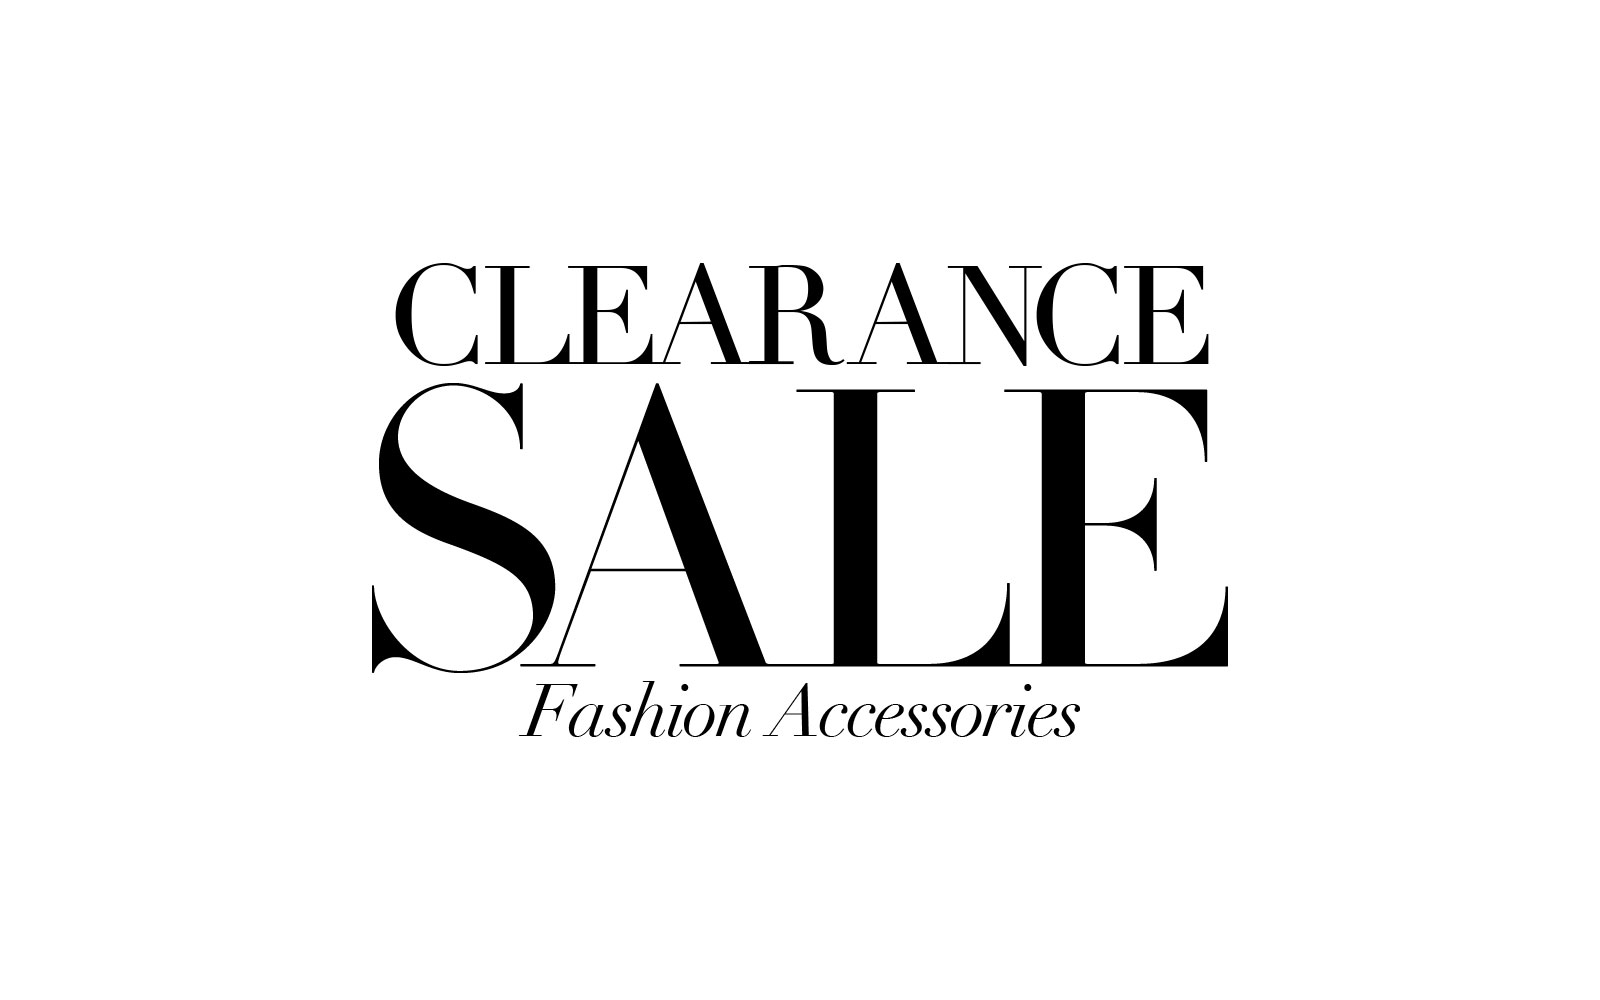 Clearance Fashion Accessories